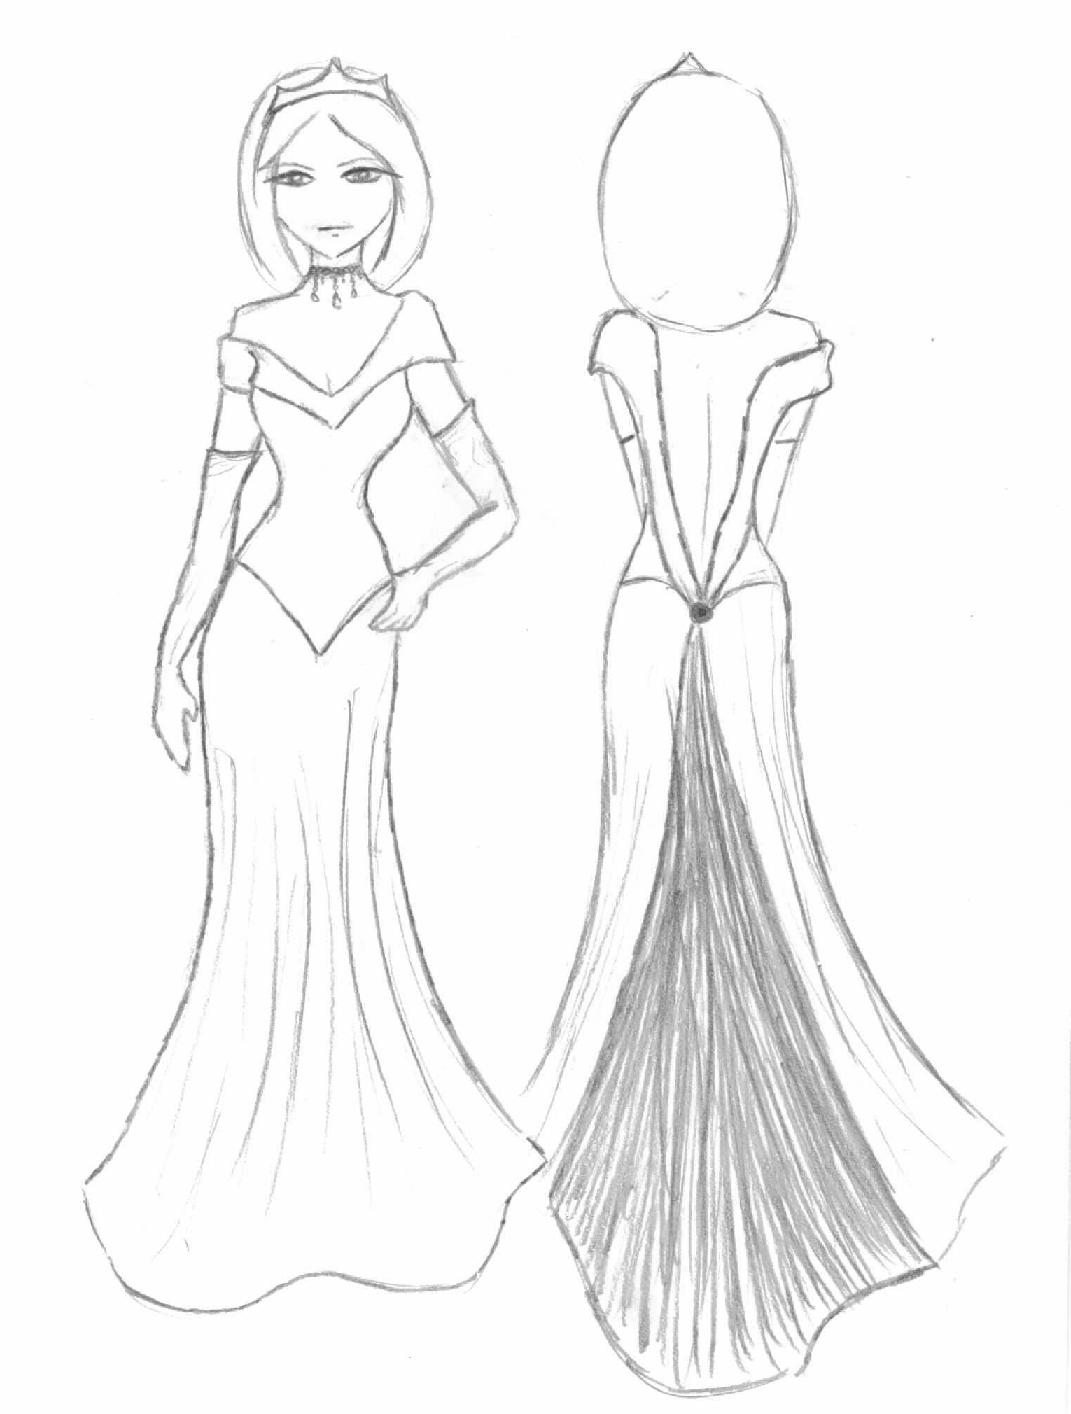 Evening Gown 2 by Mandi_Cottontail